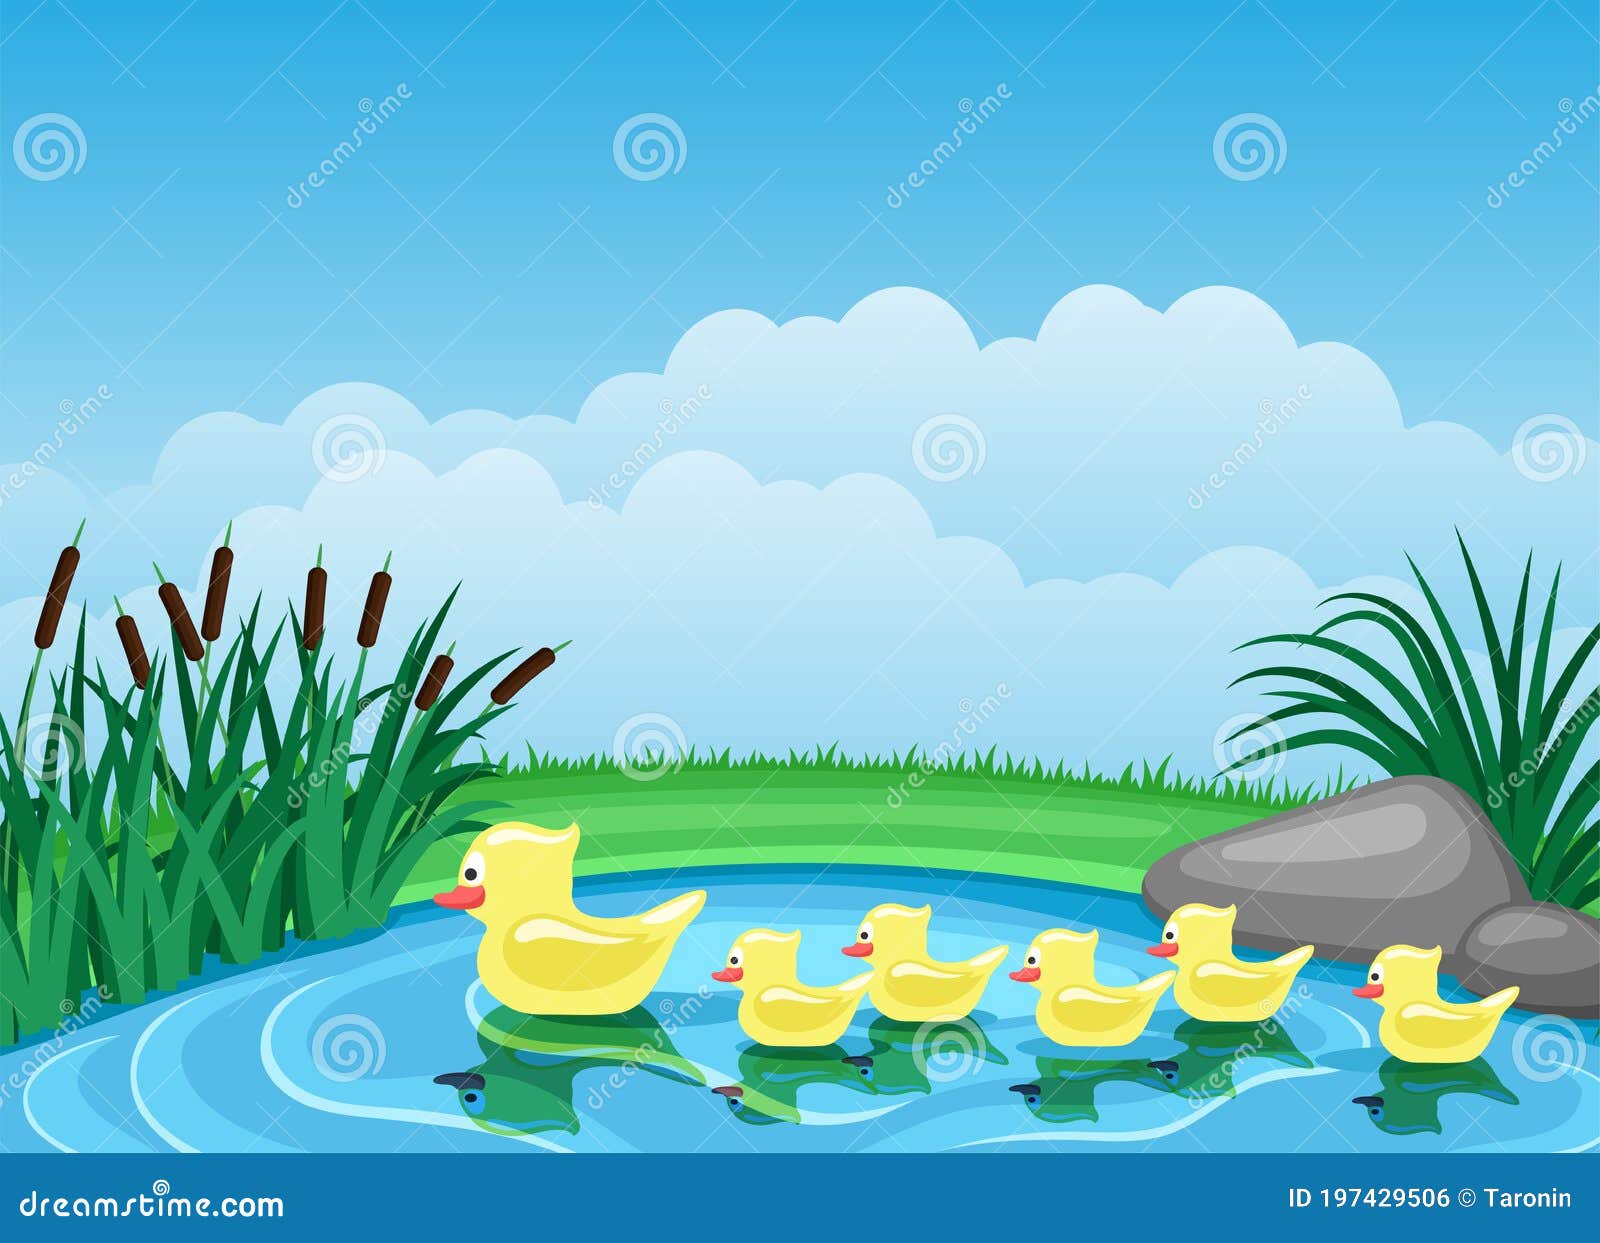 cute ducks swimming on the pond.